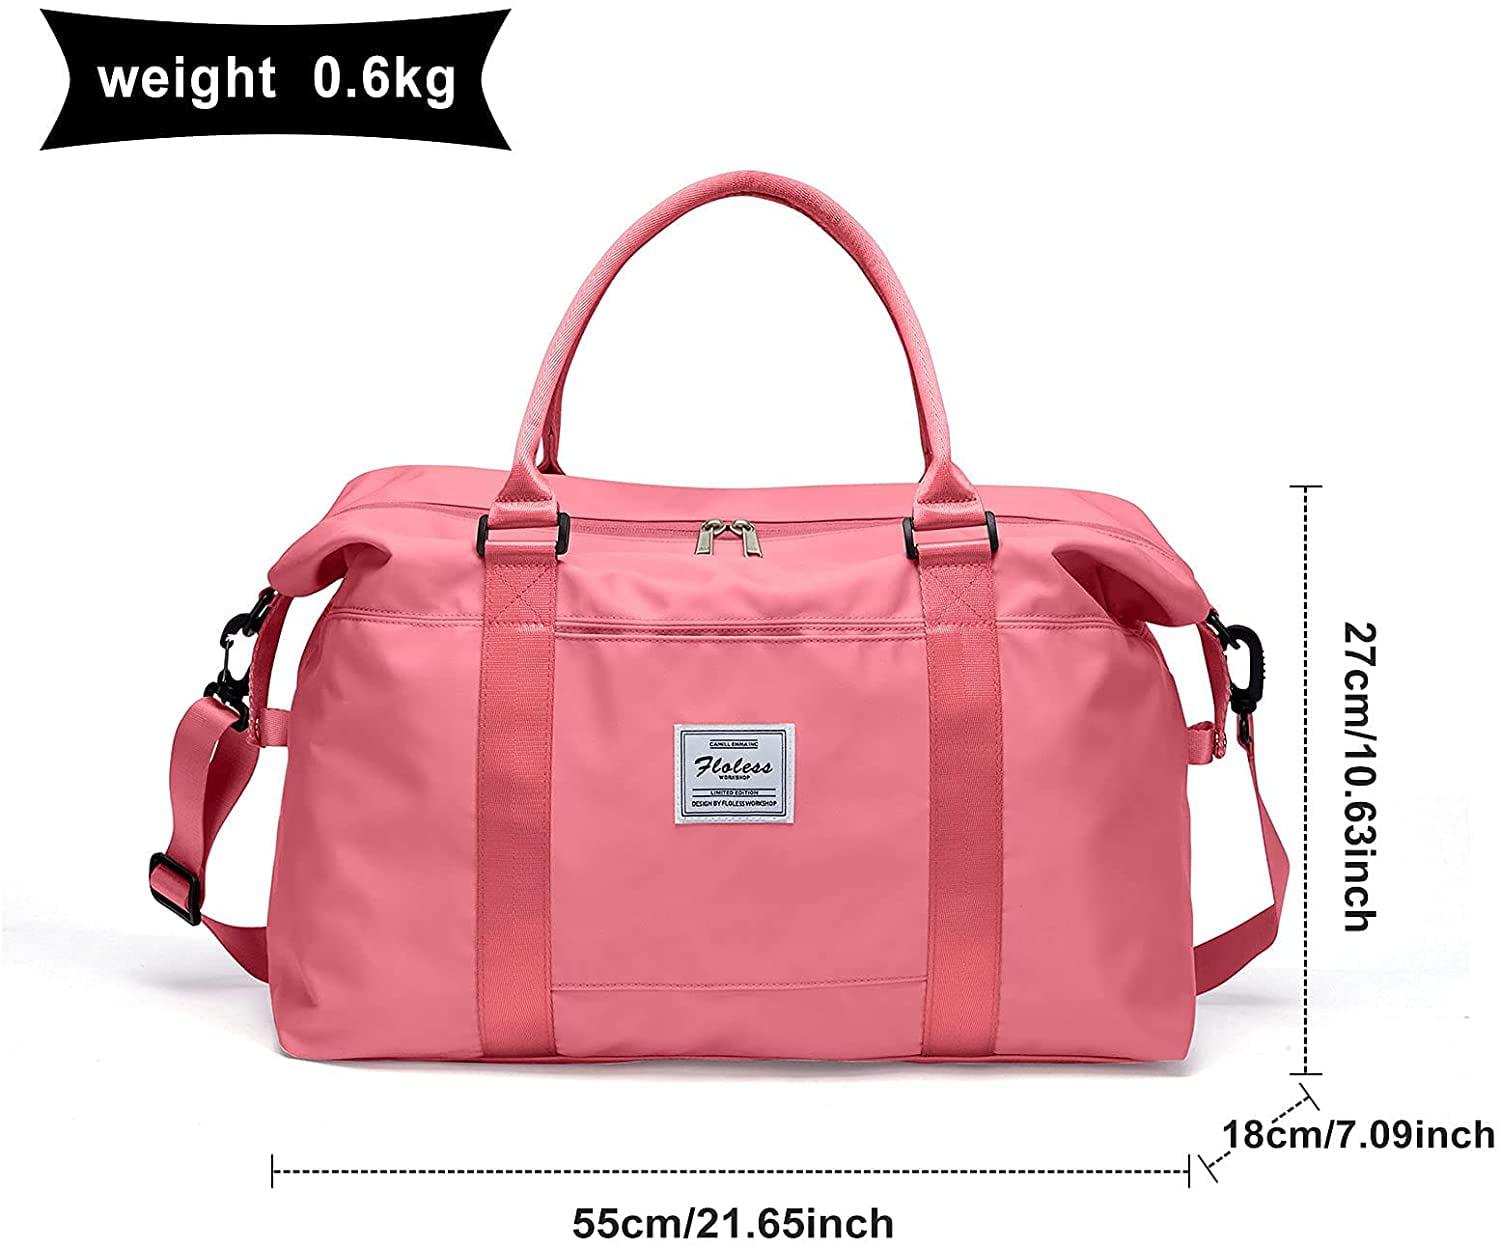 HONYMUM Duffle Bag for Travel,Shoulder Weekender Carry On Bag for  Women,Overnight Bags for Women,Cute Travel Tote Bag Gym Duffle Bag with Wet